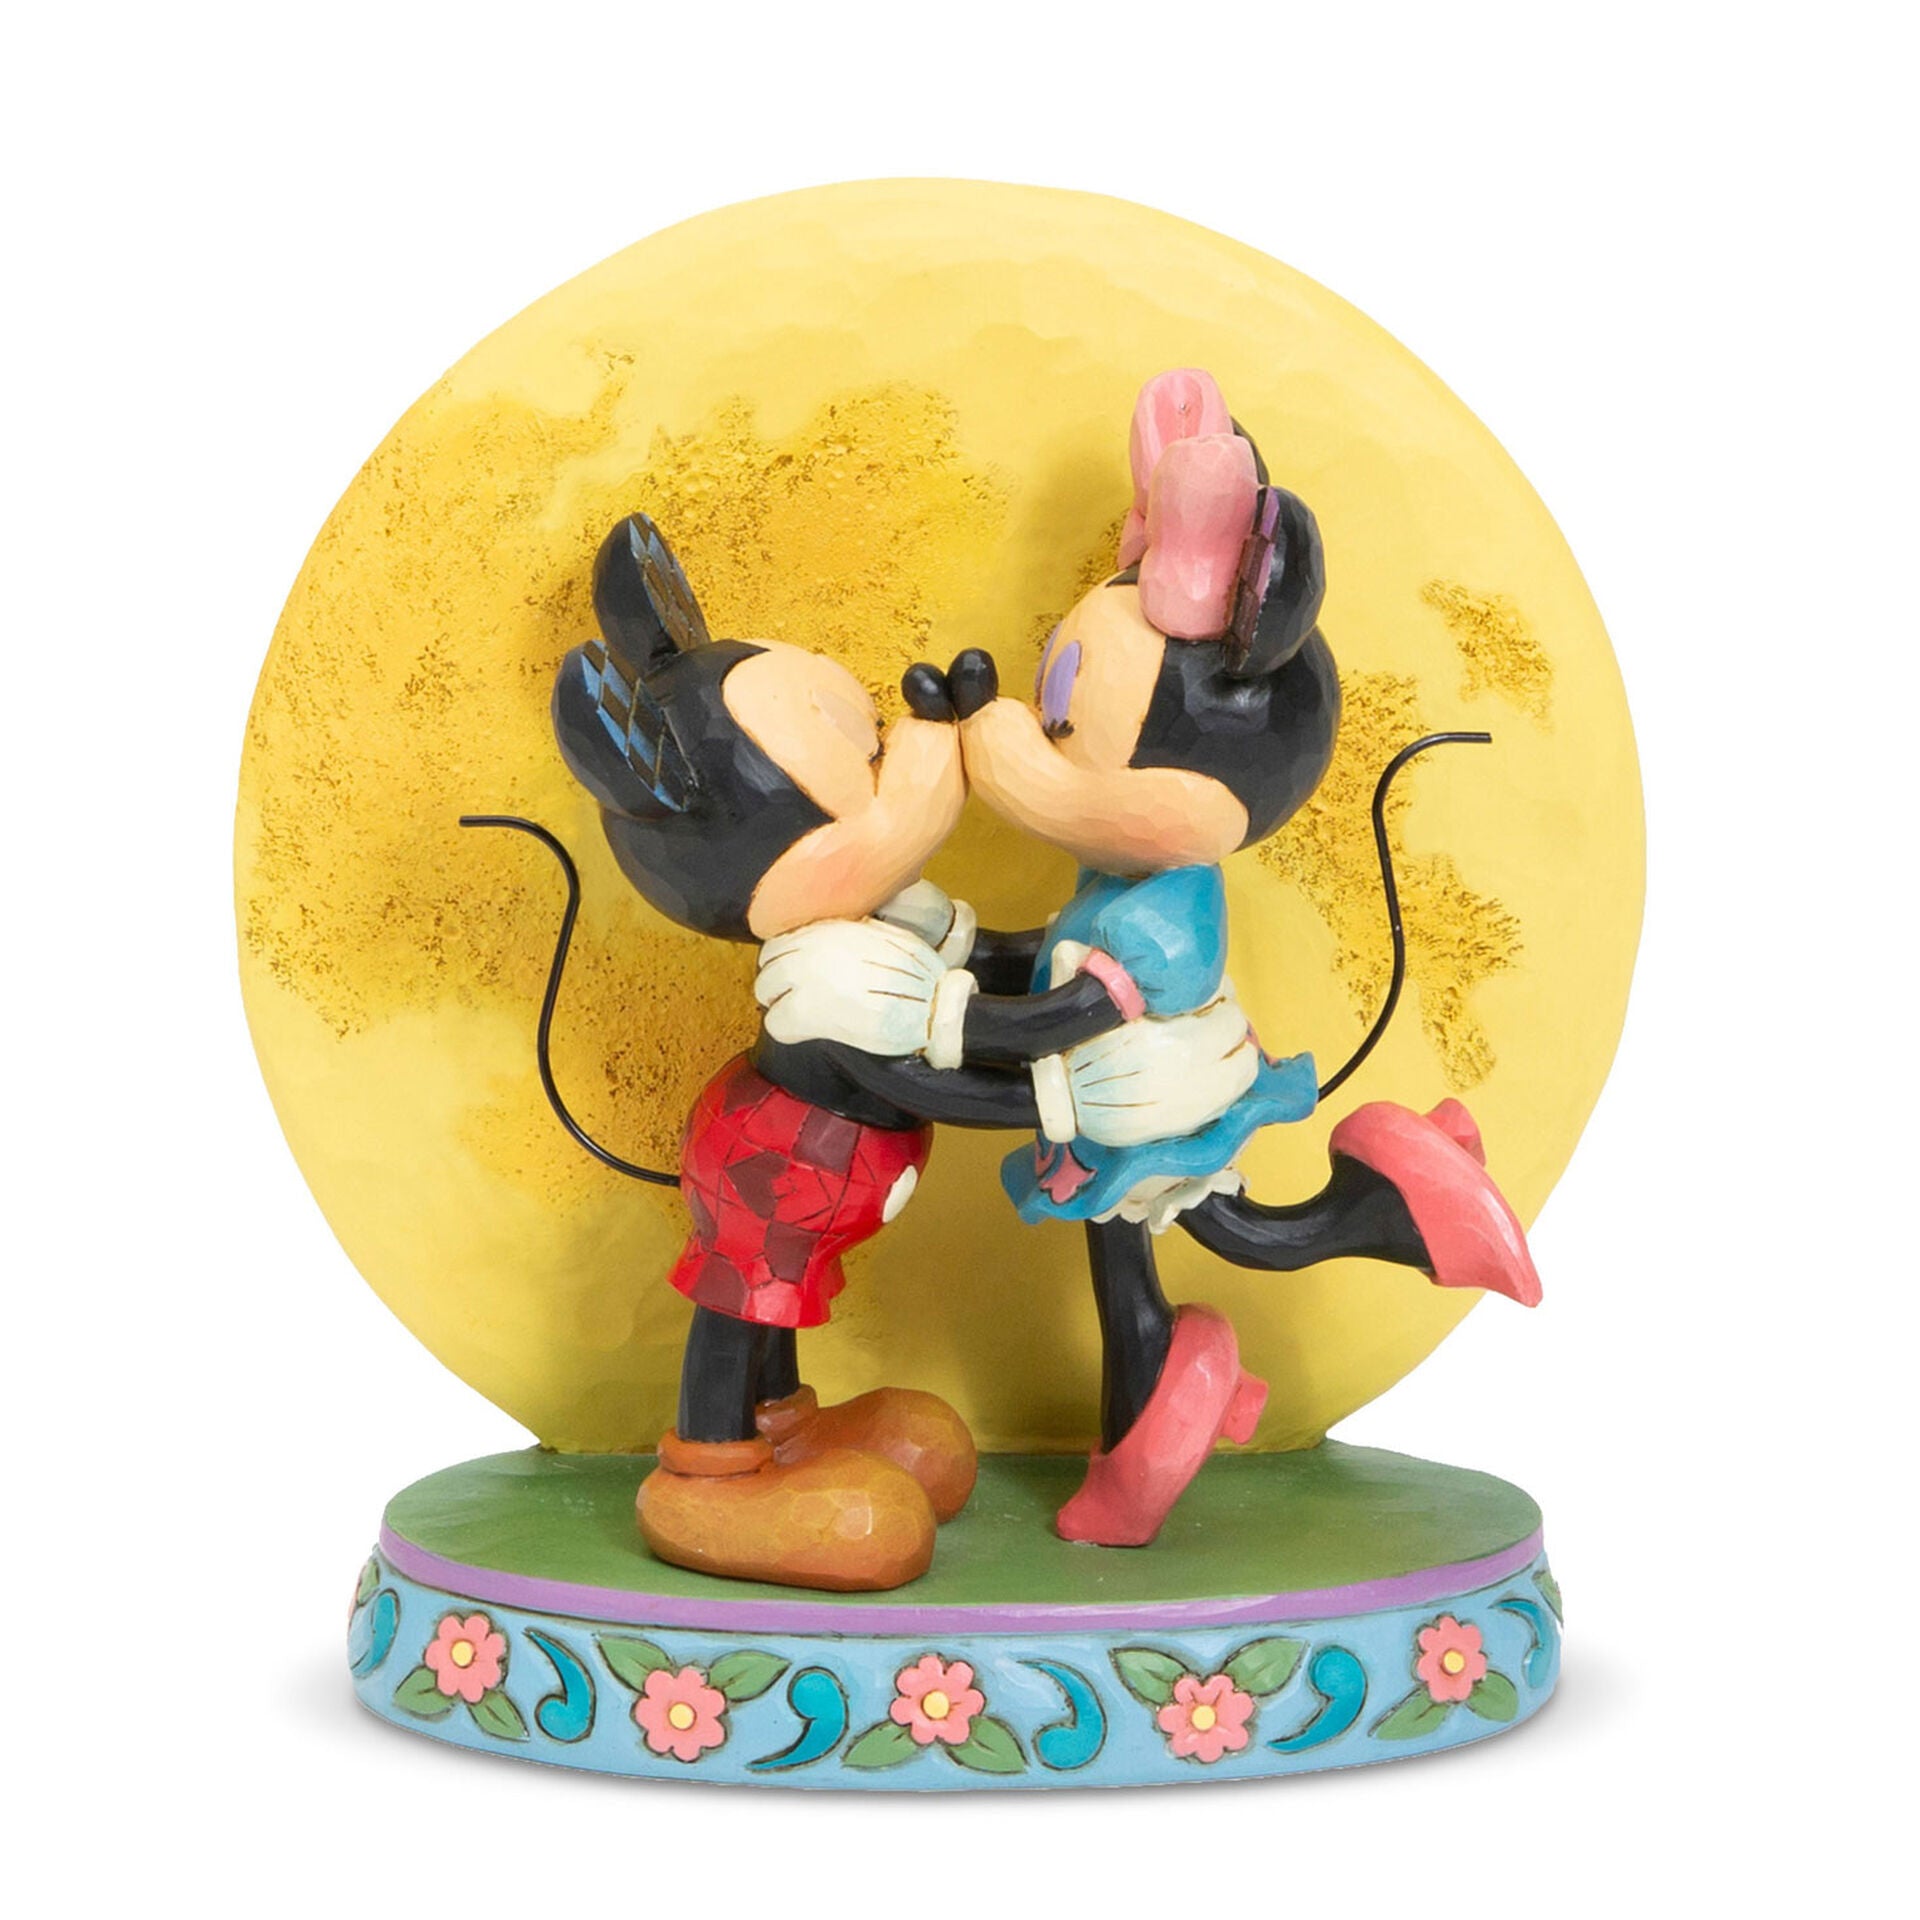 Magic And Moonlight - Mickey & Minnie Figurine By Jim Shore